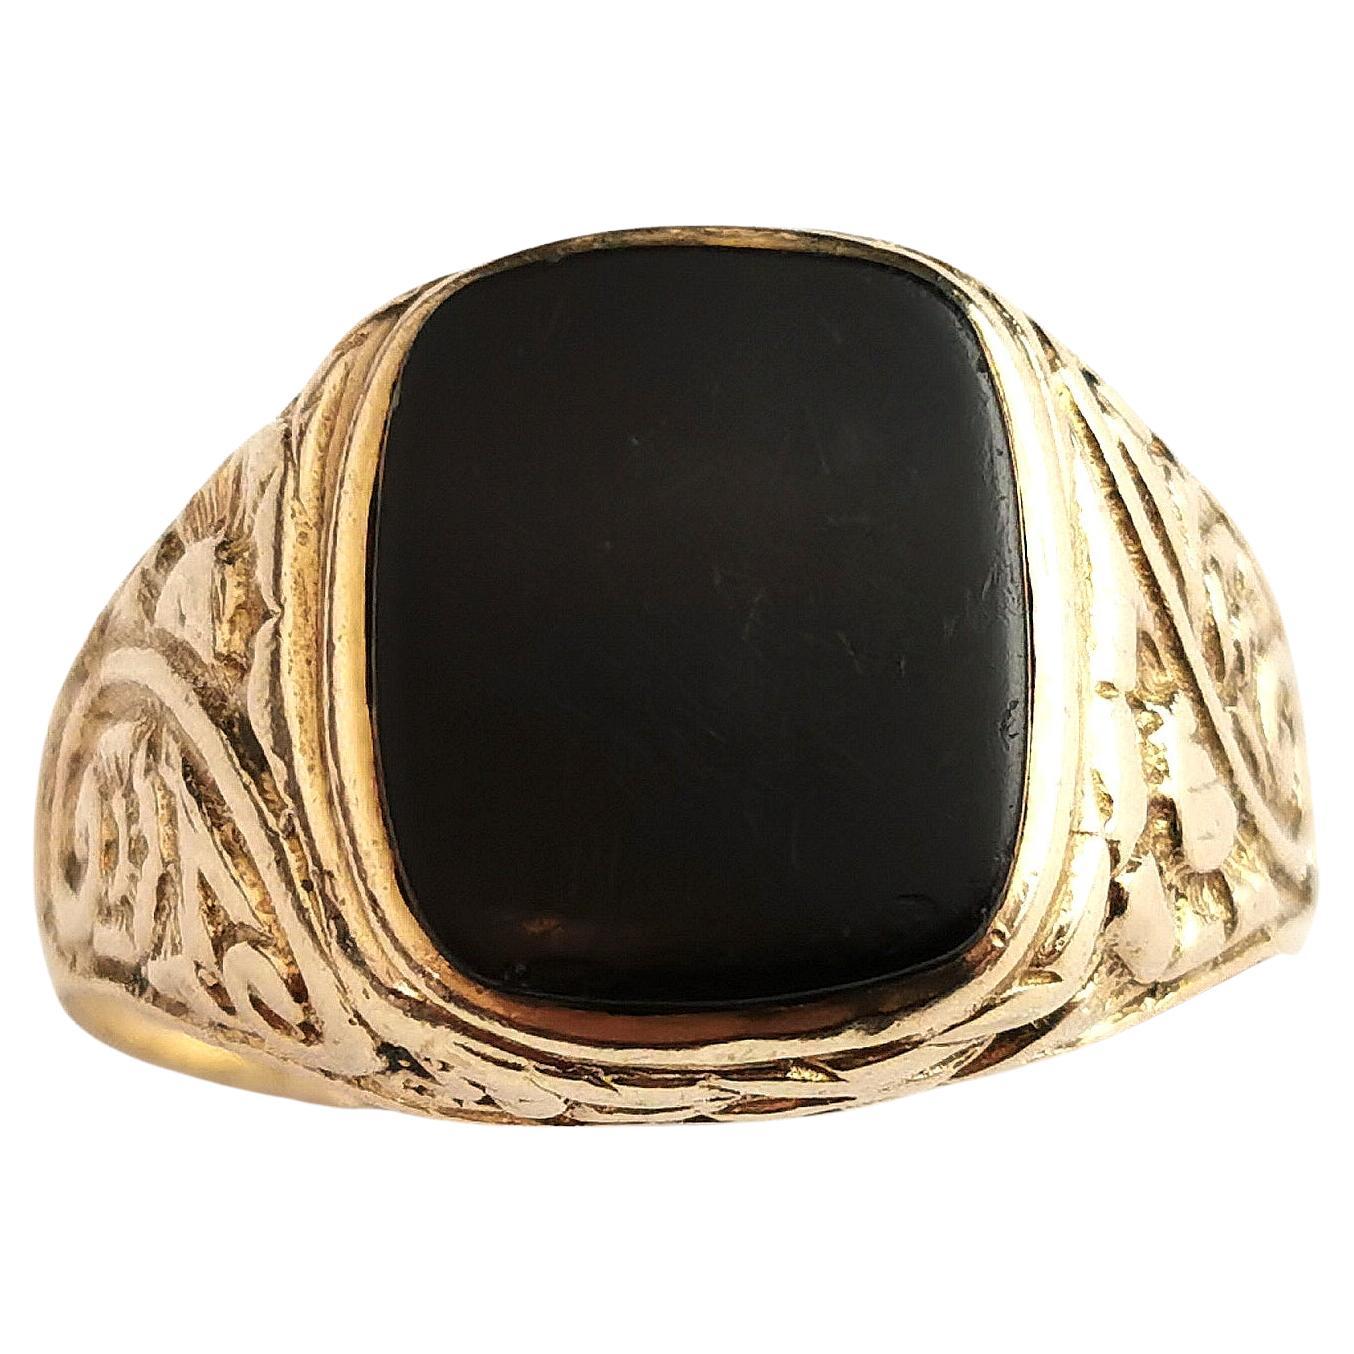 Vintage Onyx signet ring, 9k yellow gold, floral engraved 